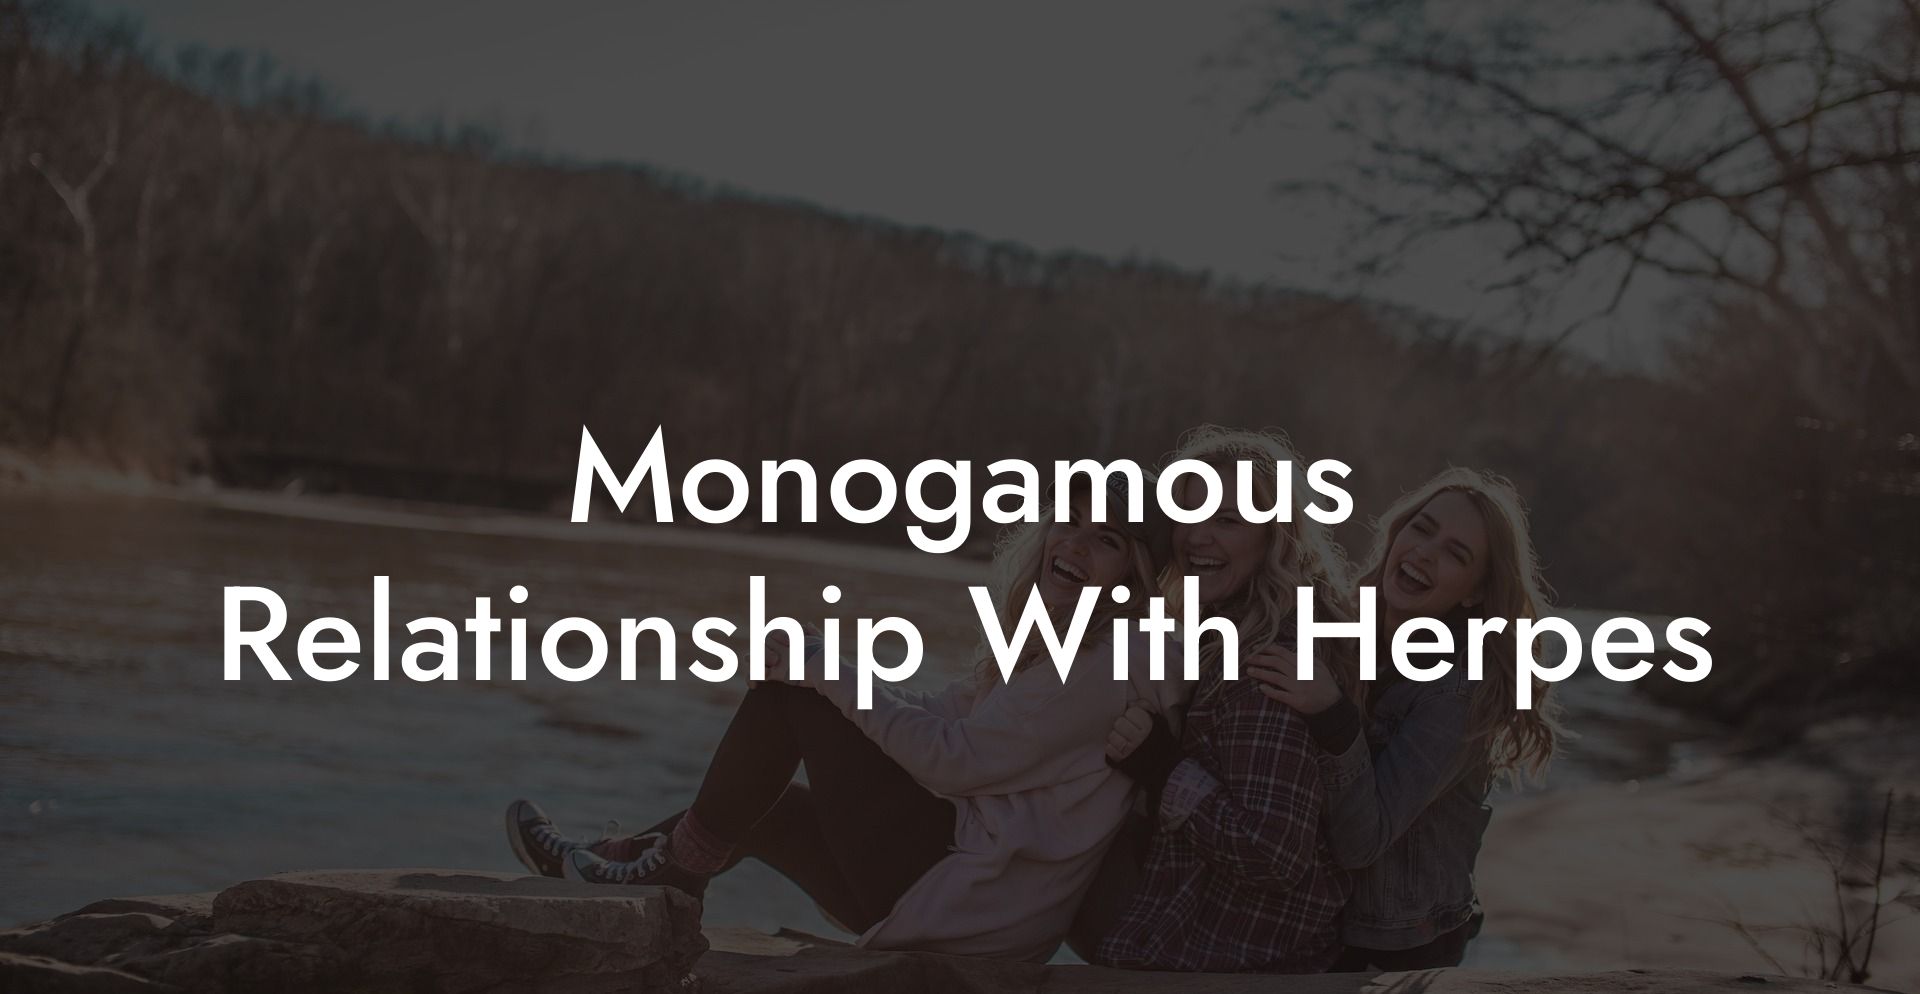 Monogamous Relationship With Herpes